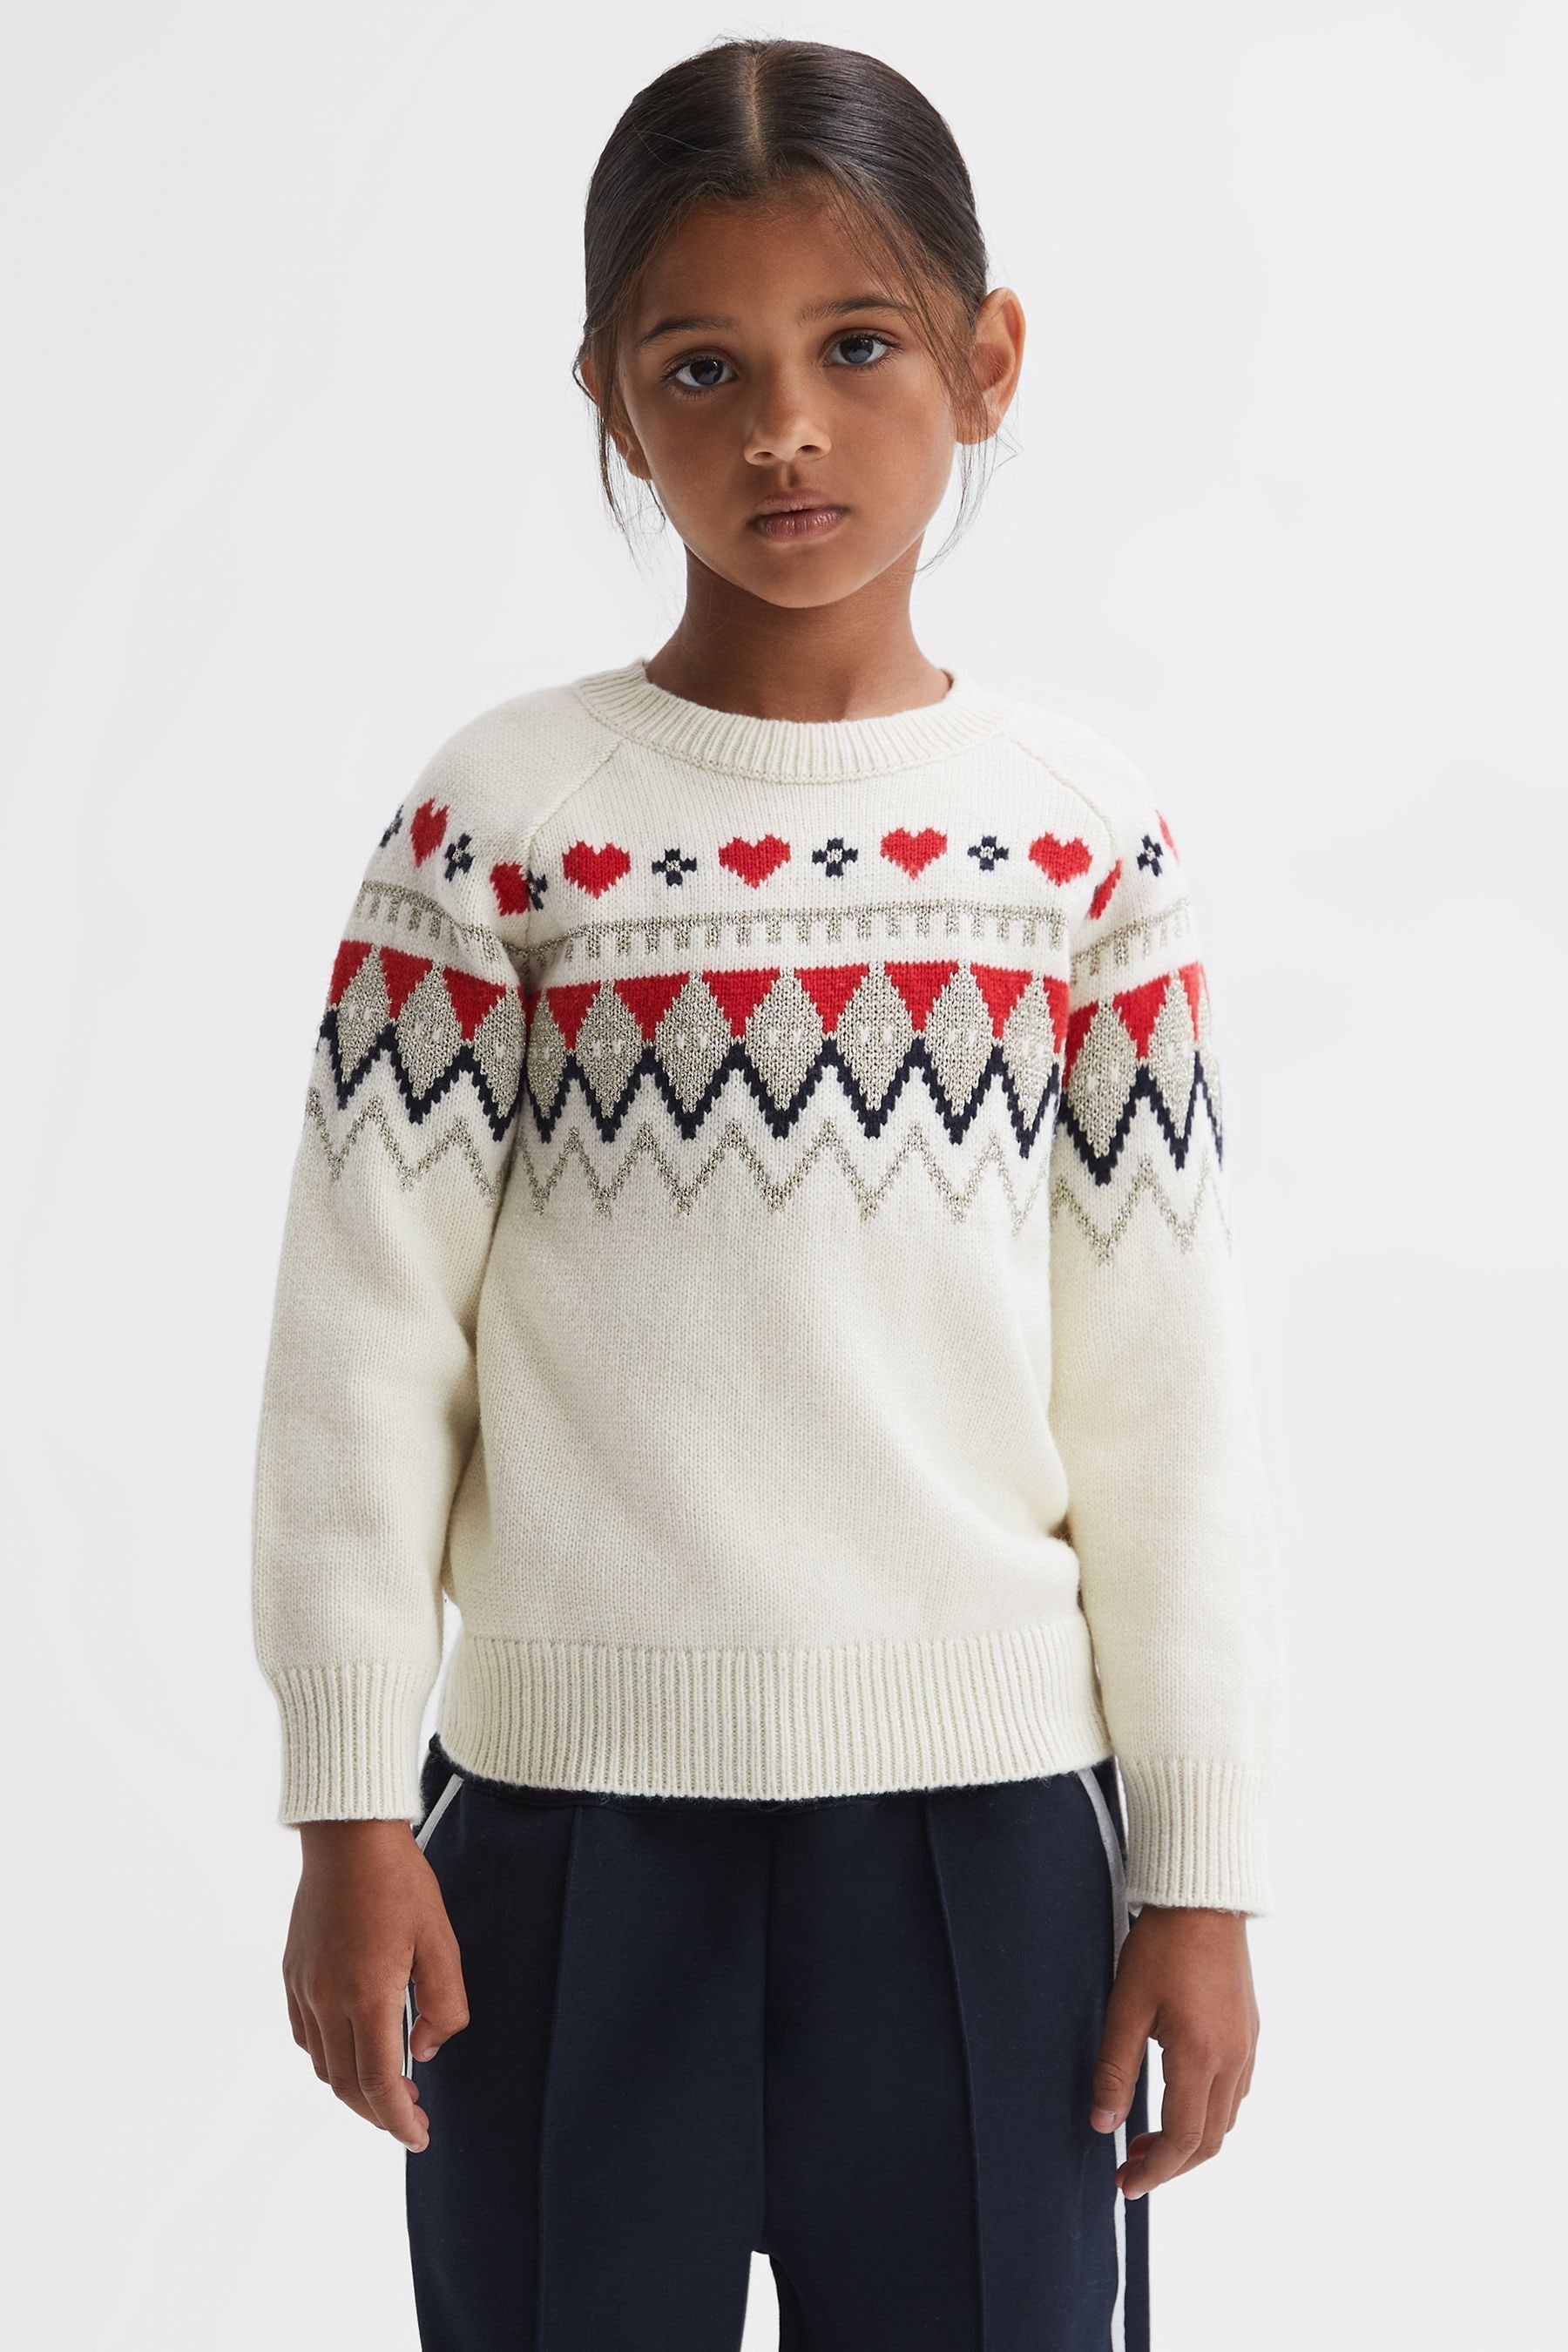 Reiss Charlotte - Ivory Junior Relaxed Wool-cotton Argyle Jumper, Age 5-6 Years